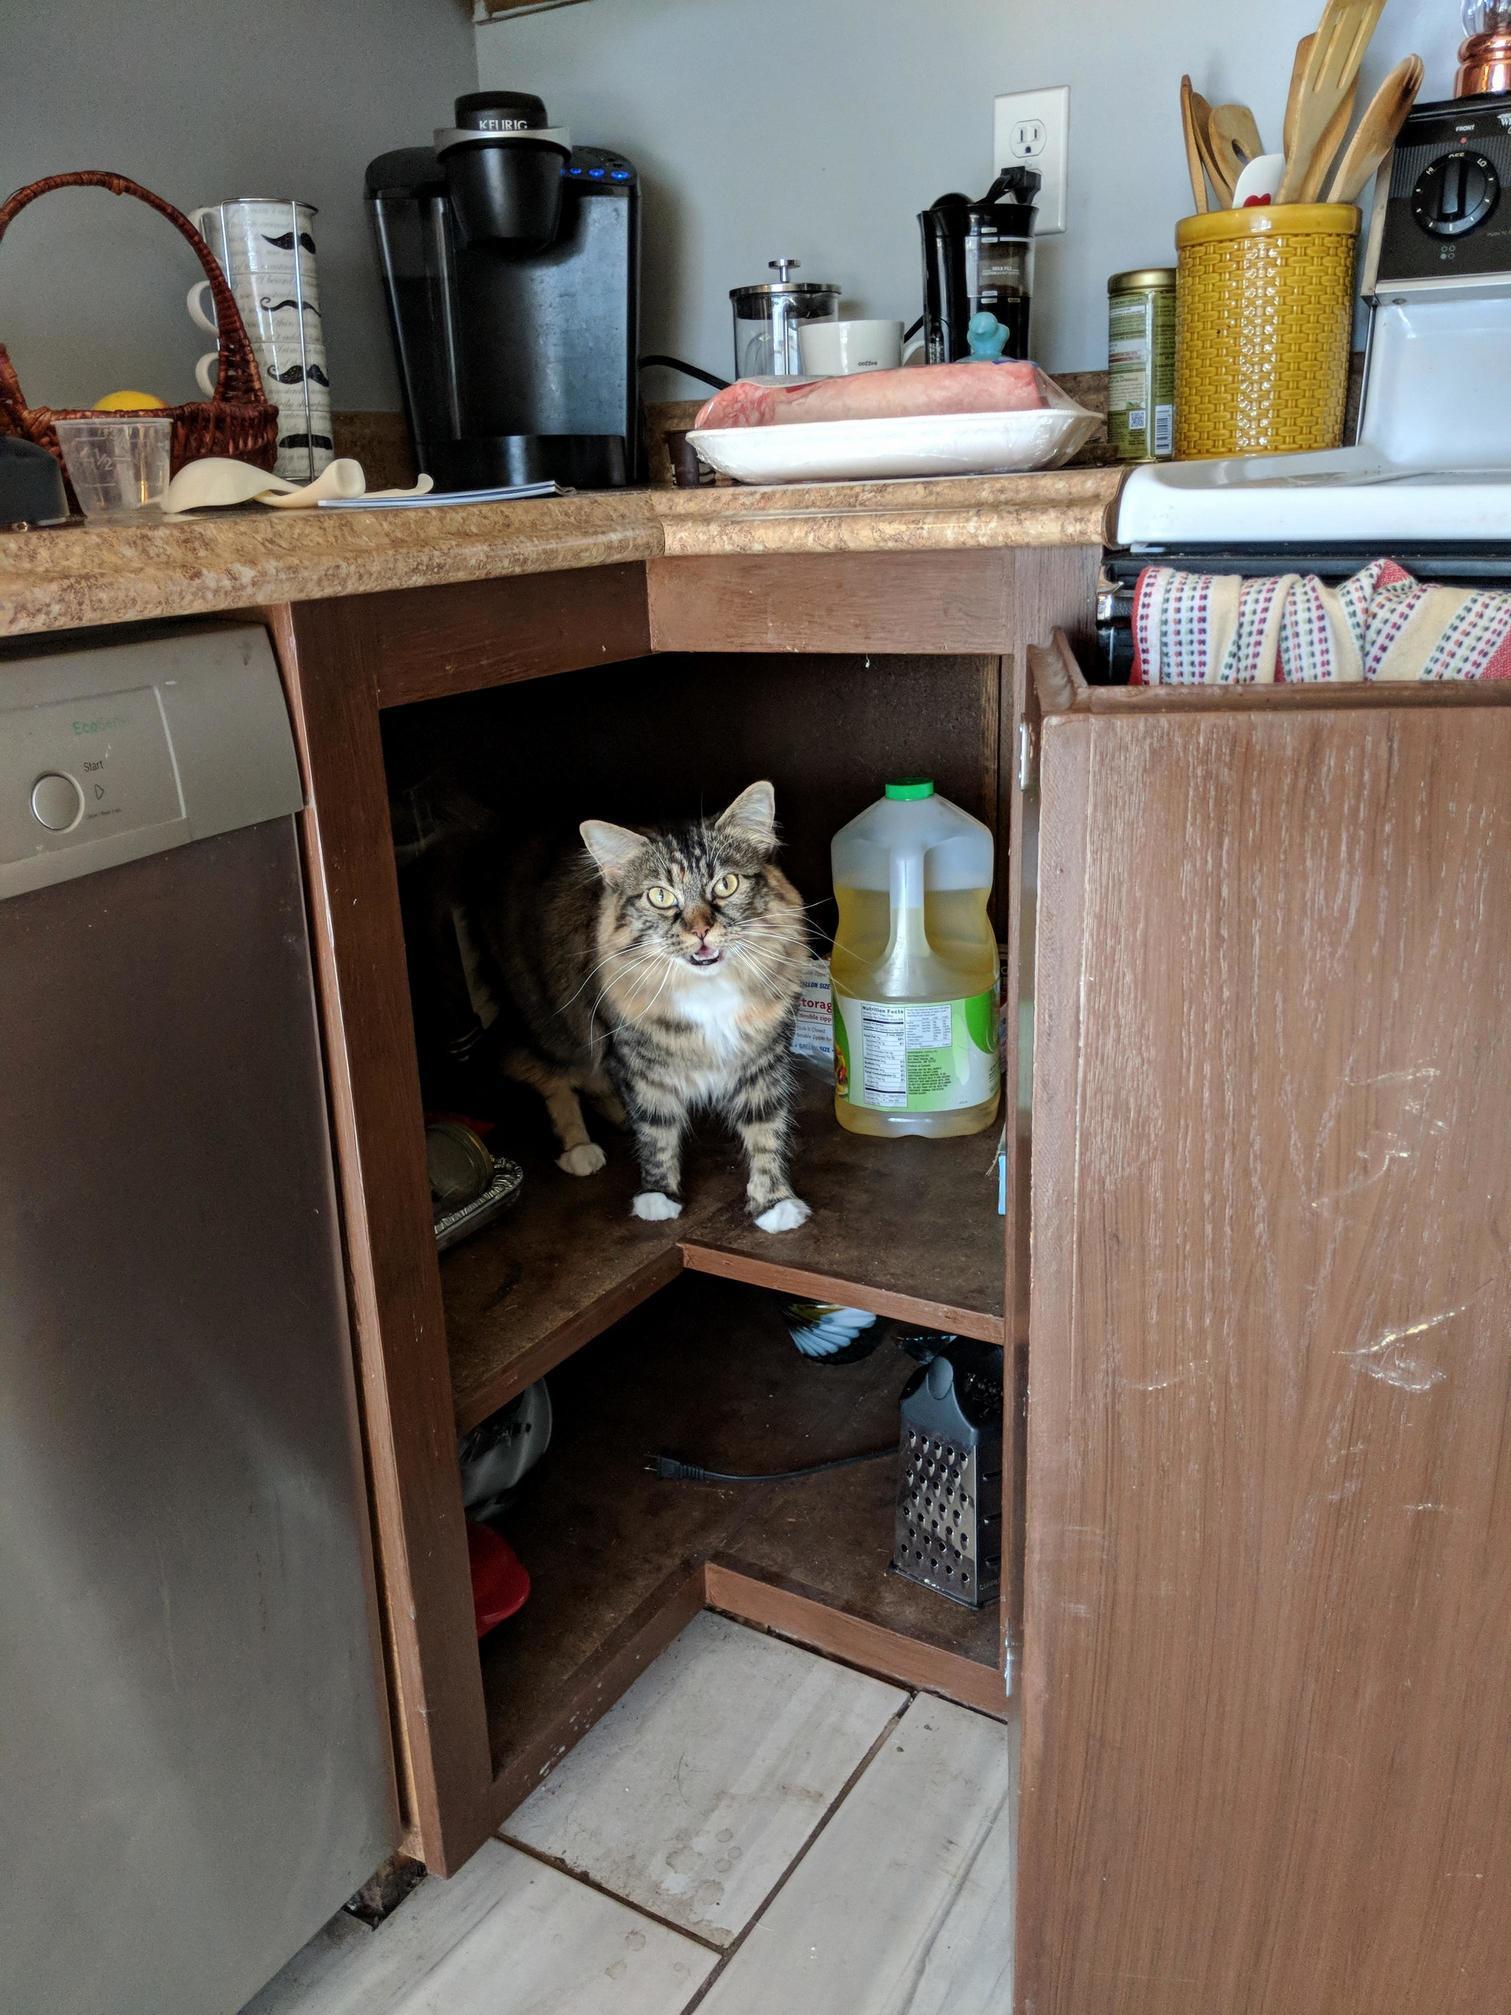 Couldnt find the cat. opened the cupboard to find this…